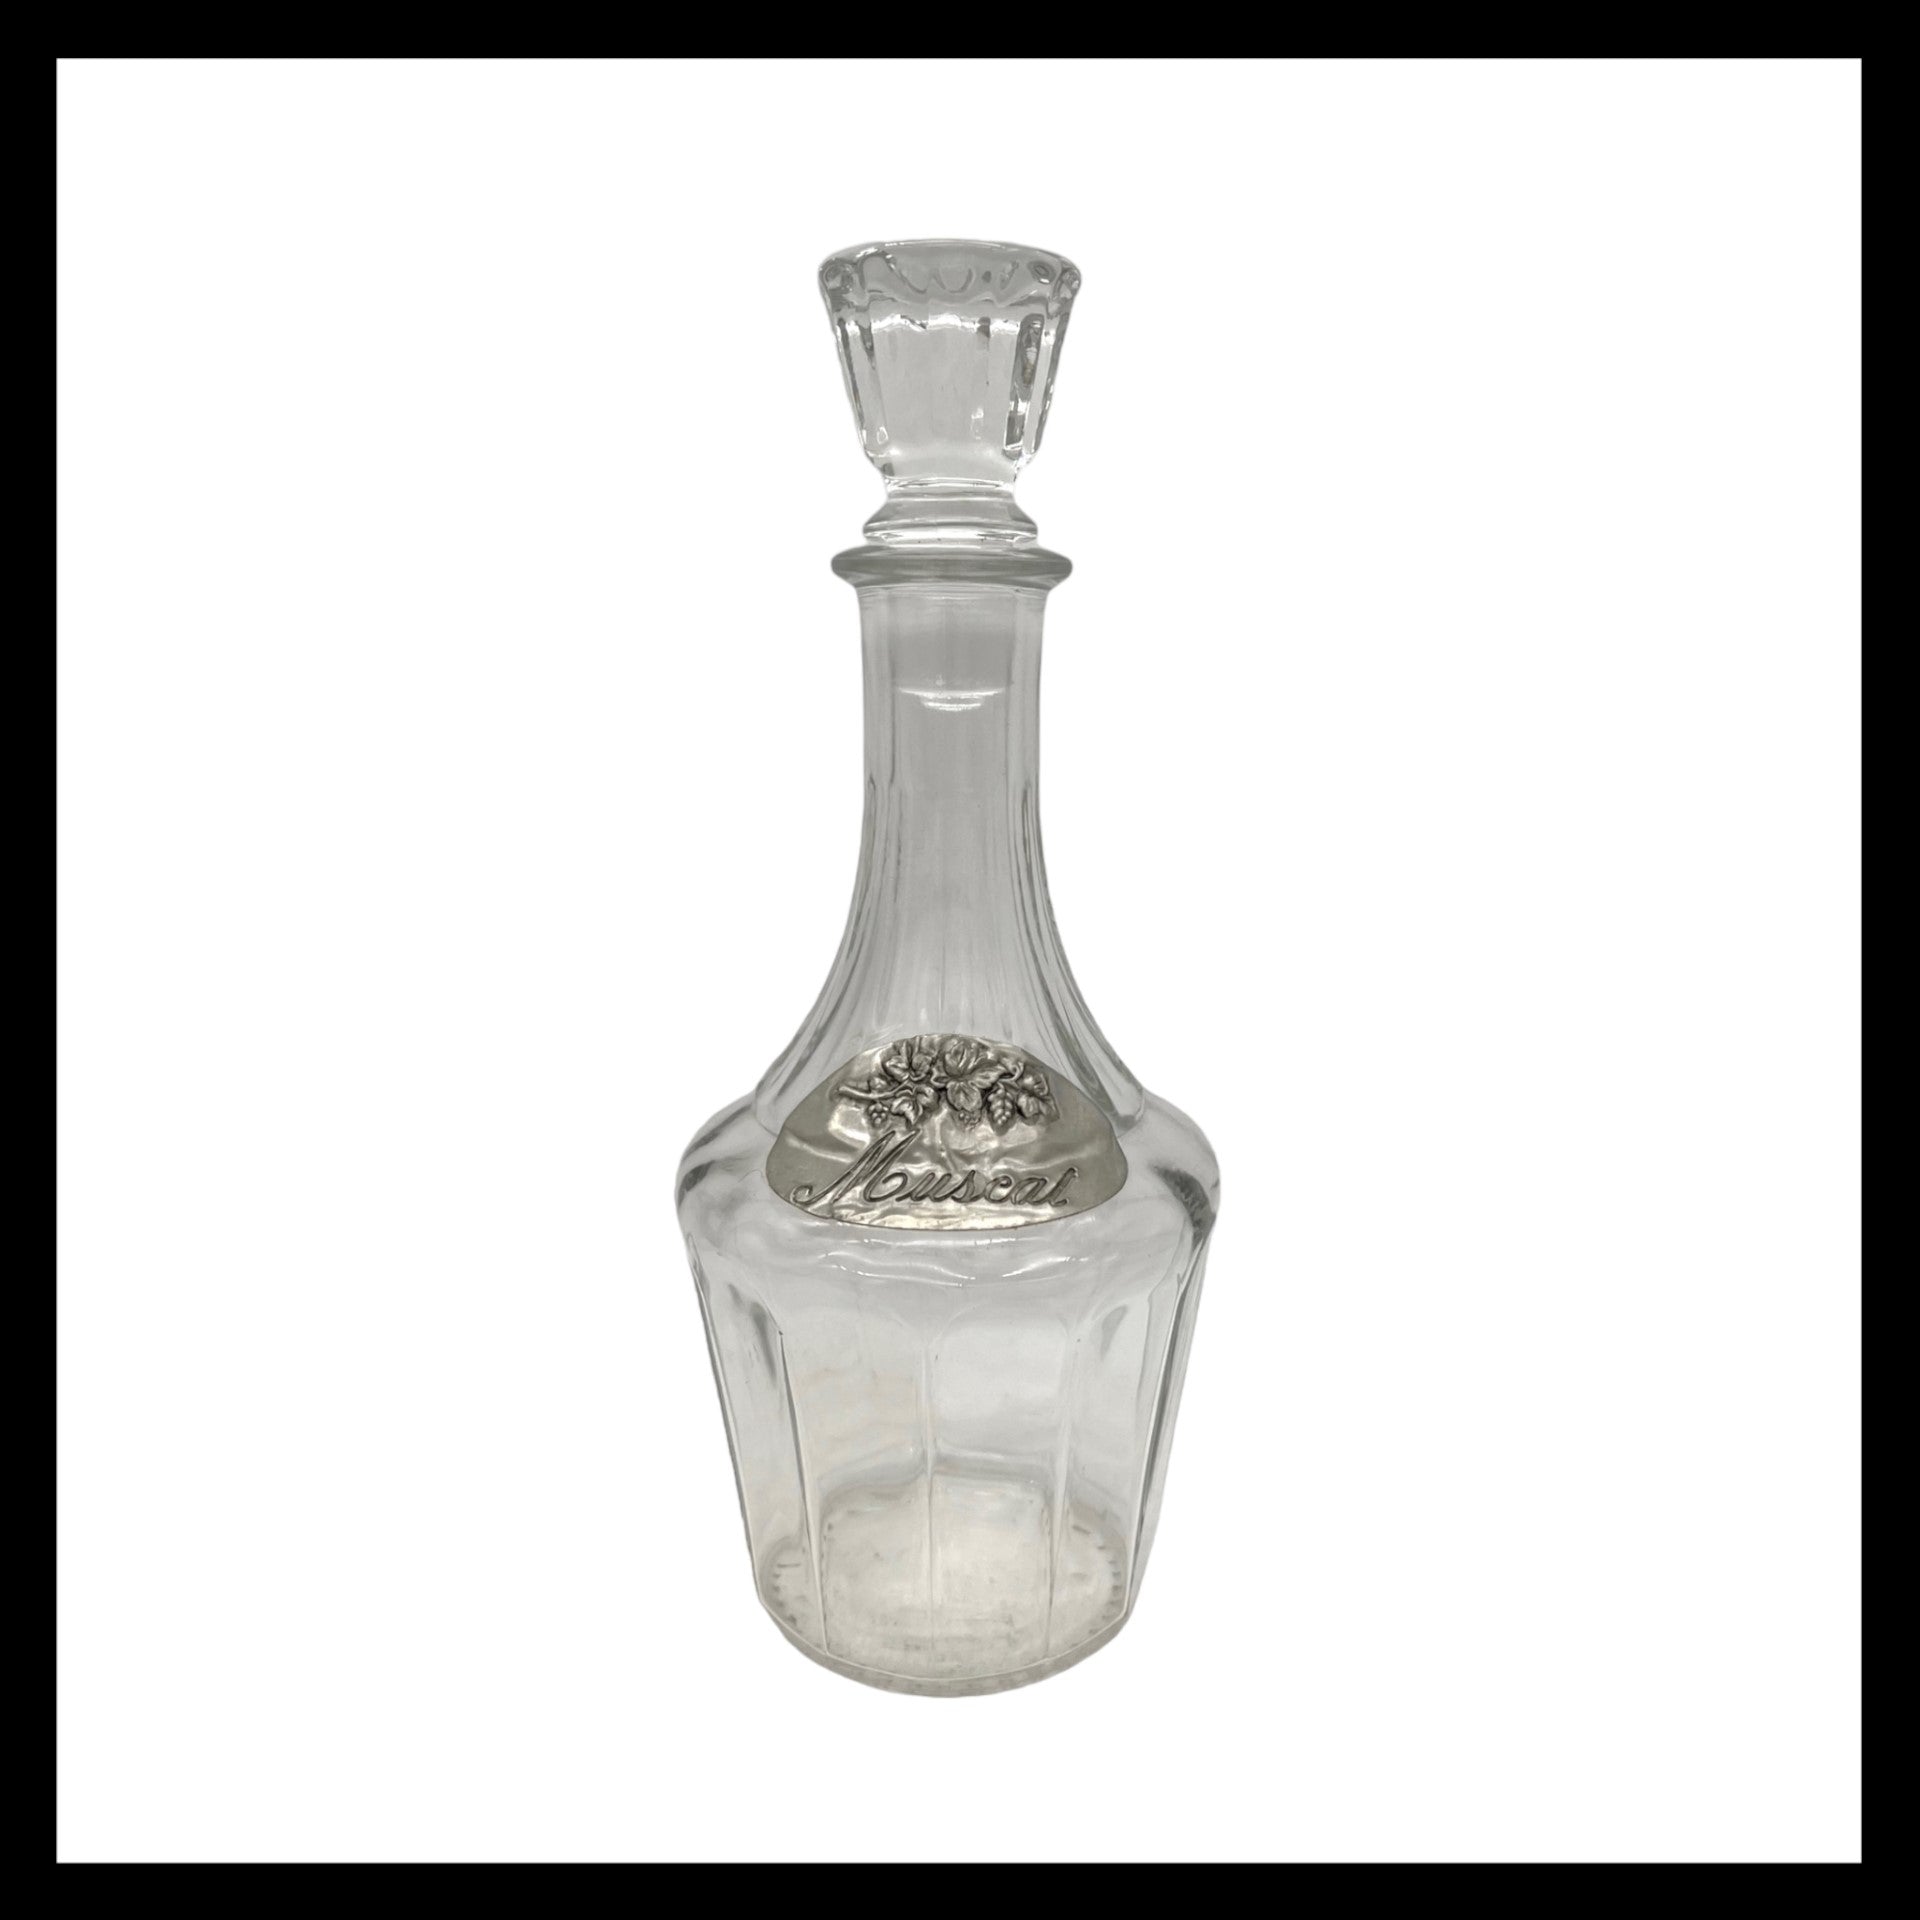 image French decanter bottle with Muscat label sold by All Things French Store